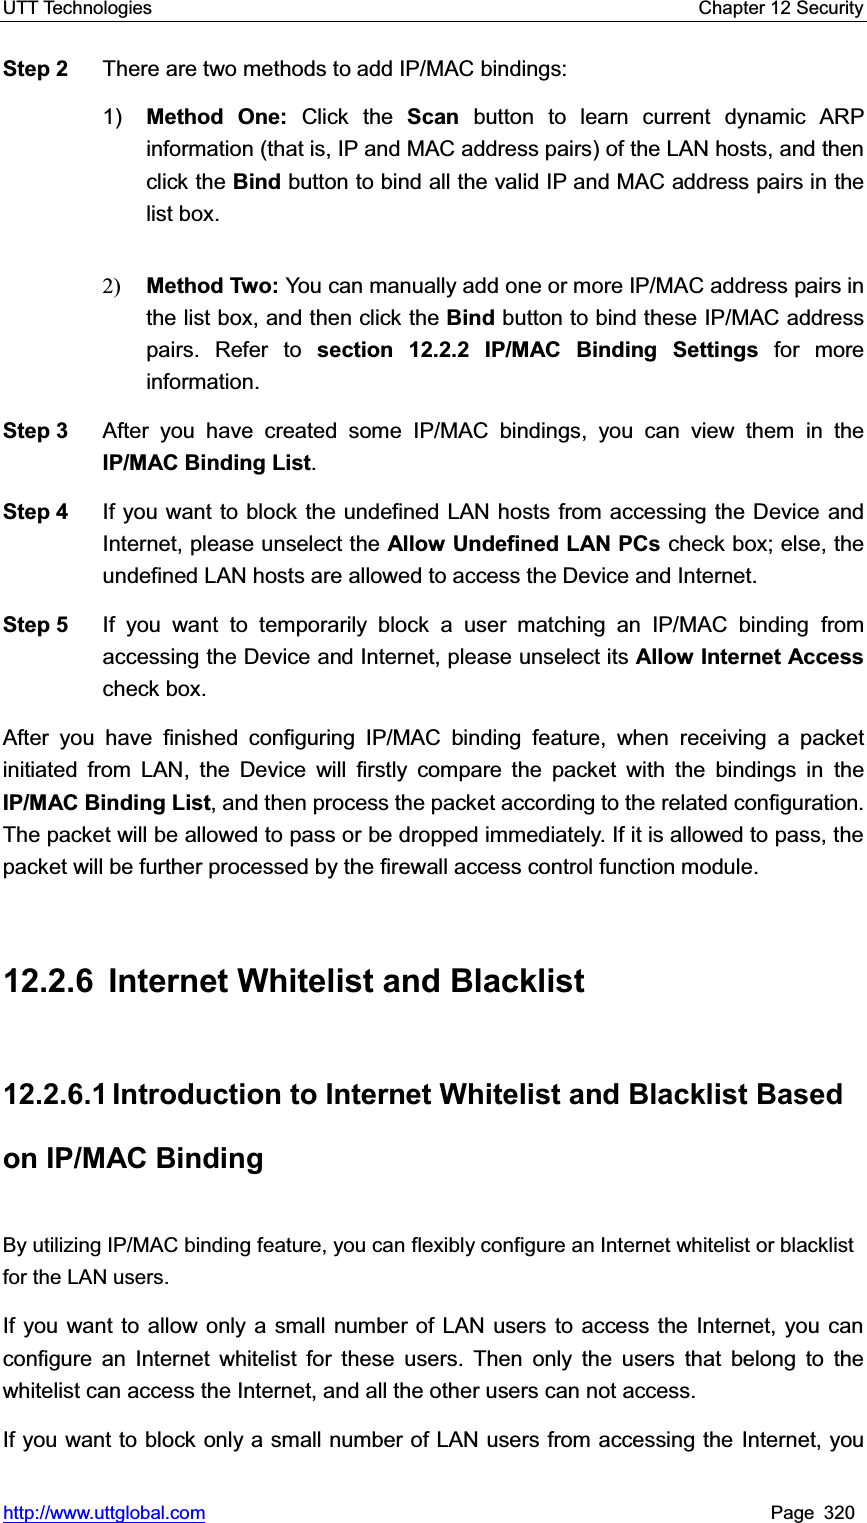 UTT Technologies    Chapter 12 Security   http://www.uttglobal.com Page 320 Step 2  There are two methods to add IP/MAC bindings: 1) Method One: Click the Scan button to learn current dynamic ARP information (that is, IP and MAC address pairs) of the LAN hosts, and thenclick the Bind button to bind all the valid IP and MAC address pairs in the list box. 2) Method Two: You can manually add one or more IP/MAC address pairs in the list box, and then click the Bind button to bind these IP/MAC address pairs. Refer to section 12.2.2 IP/MAC Binding Settings for more information. Step 3  After you have created some IP/MAC bindings, you can view them in theIP/MAC Binding List.Step 4  If you want to block the undefined LAN hosts from accessing the Device and Internet, please unselect the Allow Undefined LAN PCs check box; else, the undefined LAN hosts are allowed to access the Device and Internet. Step 5  If you want to temporarily block a user matching an IP/MAC binding from accessing the Device and Internet, please unselect its Allow Internet Accesscheck box.   After you have finished configuring IP/MAC binding feature, when receiving a packet initiated from LAN, the Device will firstly compare the packet with the bindings in the IP/MAC Binding List, and then process the packet according to the related configuration. The packet will be allowed to pass or be dropped immediately. If it is allowed to pass, the packet will be further processed by the firewall access control function module. 12.2.6  Internet Whitelist and Blacklist   12.2.6.1 Introduction to Internet Whitelist and Blacklist Based on IP/MAC Binding By utilizing IP/MAC binding feature, you can flexibly configure an Internet whitelist or blacklist for the LAN users.   If you want to allow only a small number of LAN users to access the Internet, you can configure an Internet whitelist for these users. Then only the users that belong to the whitelist can access the Internet, and all the other users can not access. If you want to block only a small number of LAN users from accessing the Internet, you